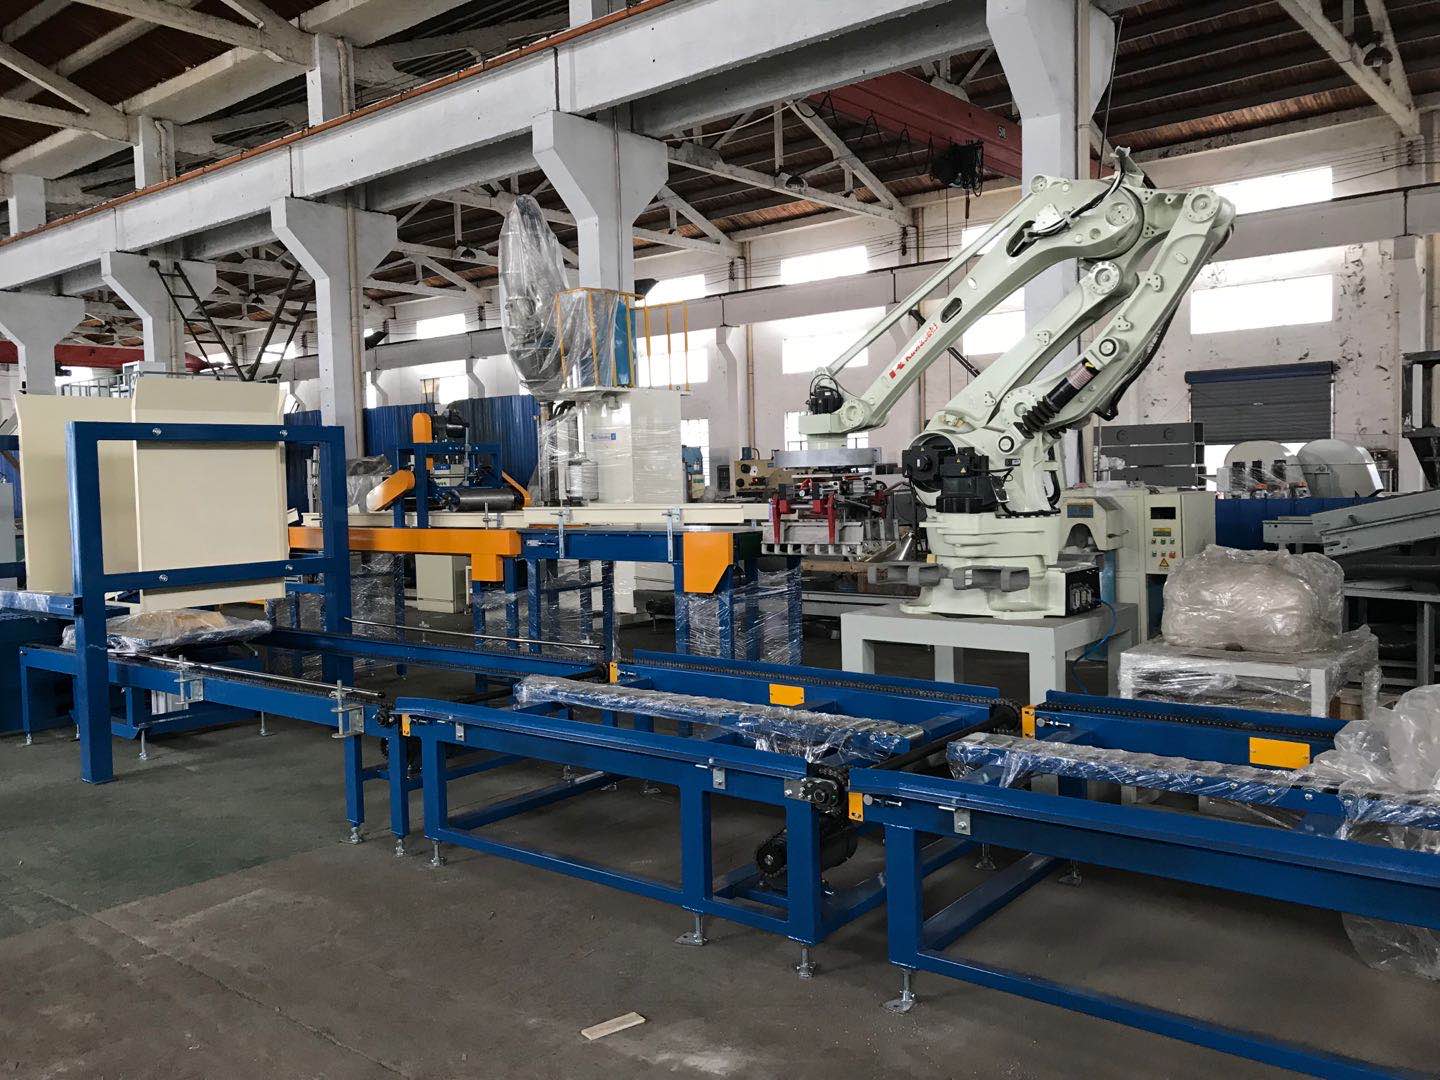 automatic packing machine Phosphate Fertilizers bagging machine fully Automatic Packing Palletizing Line, Fully Automatic Packing Line, Fully Automatic Bagging Line, Fully Automatic filling and packag